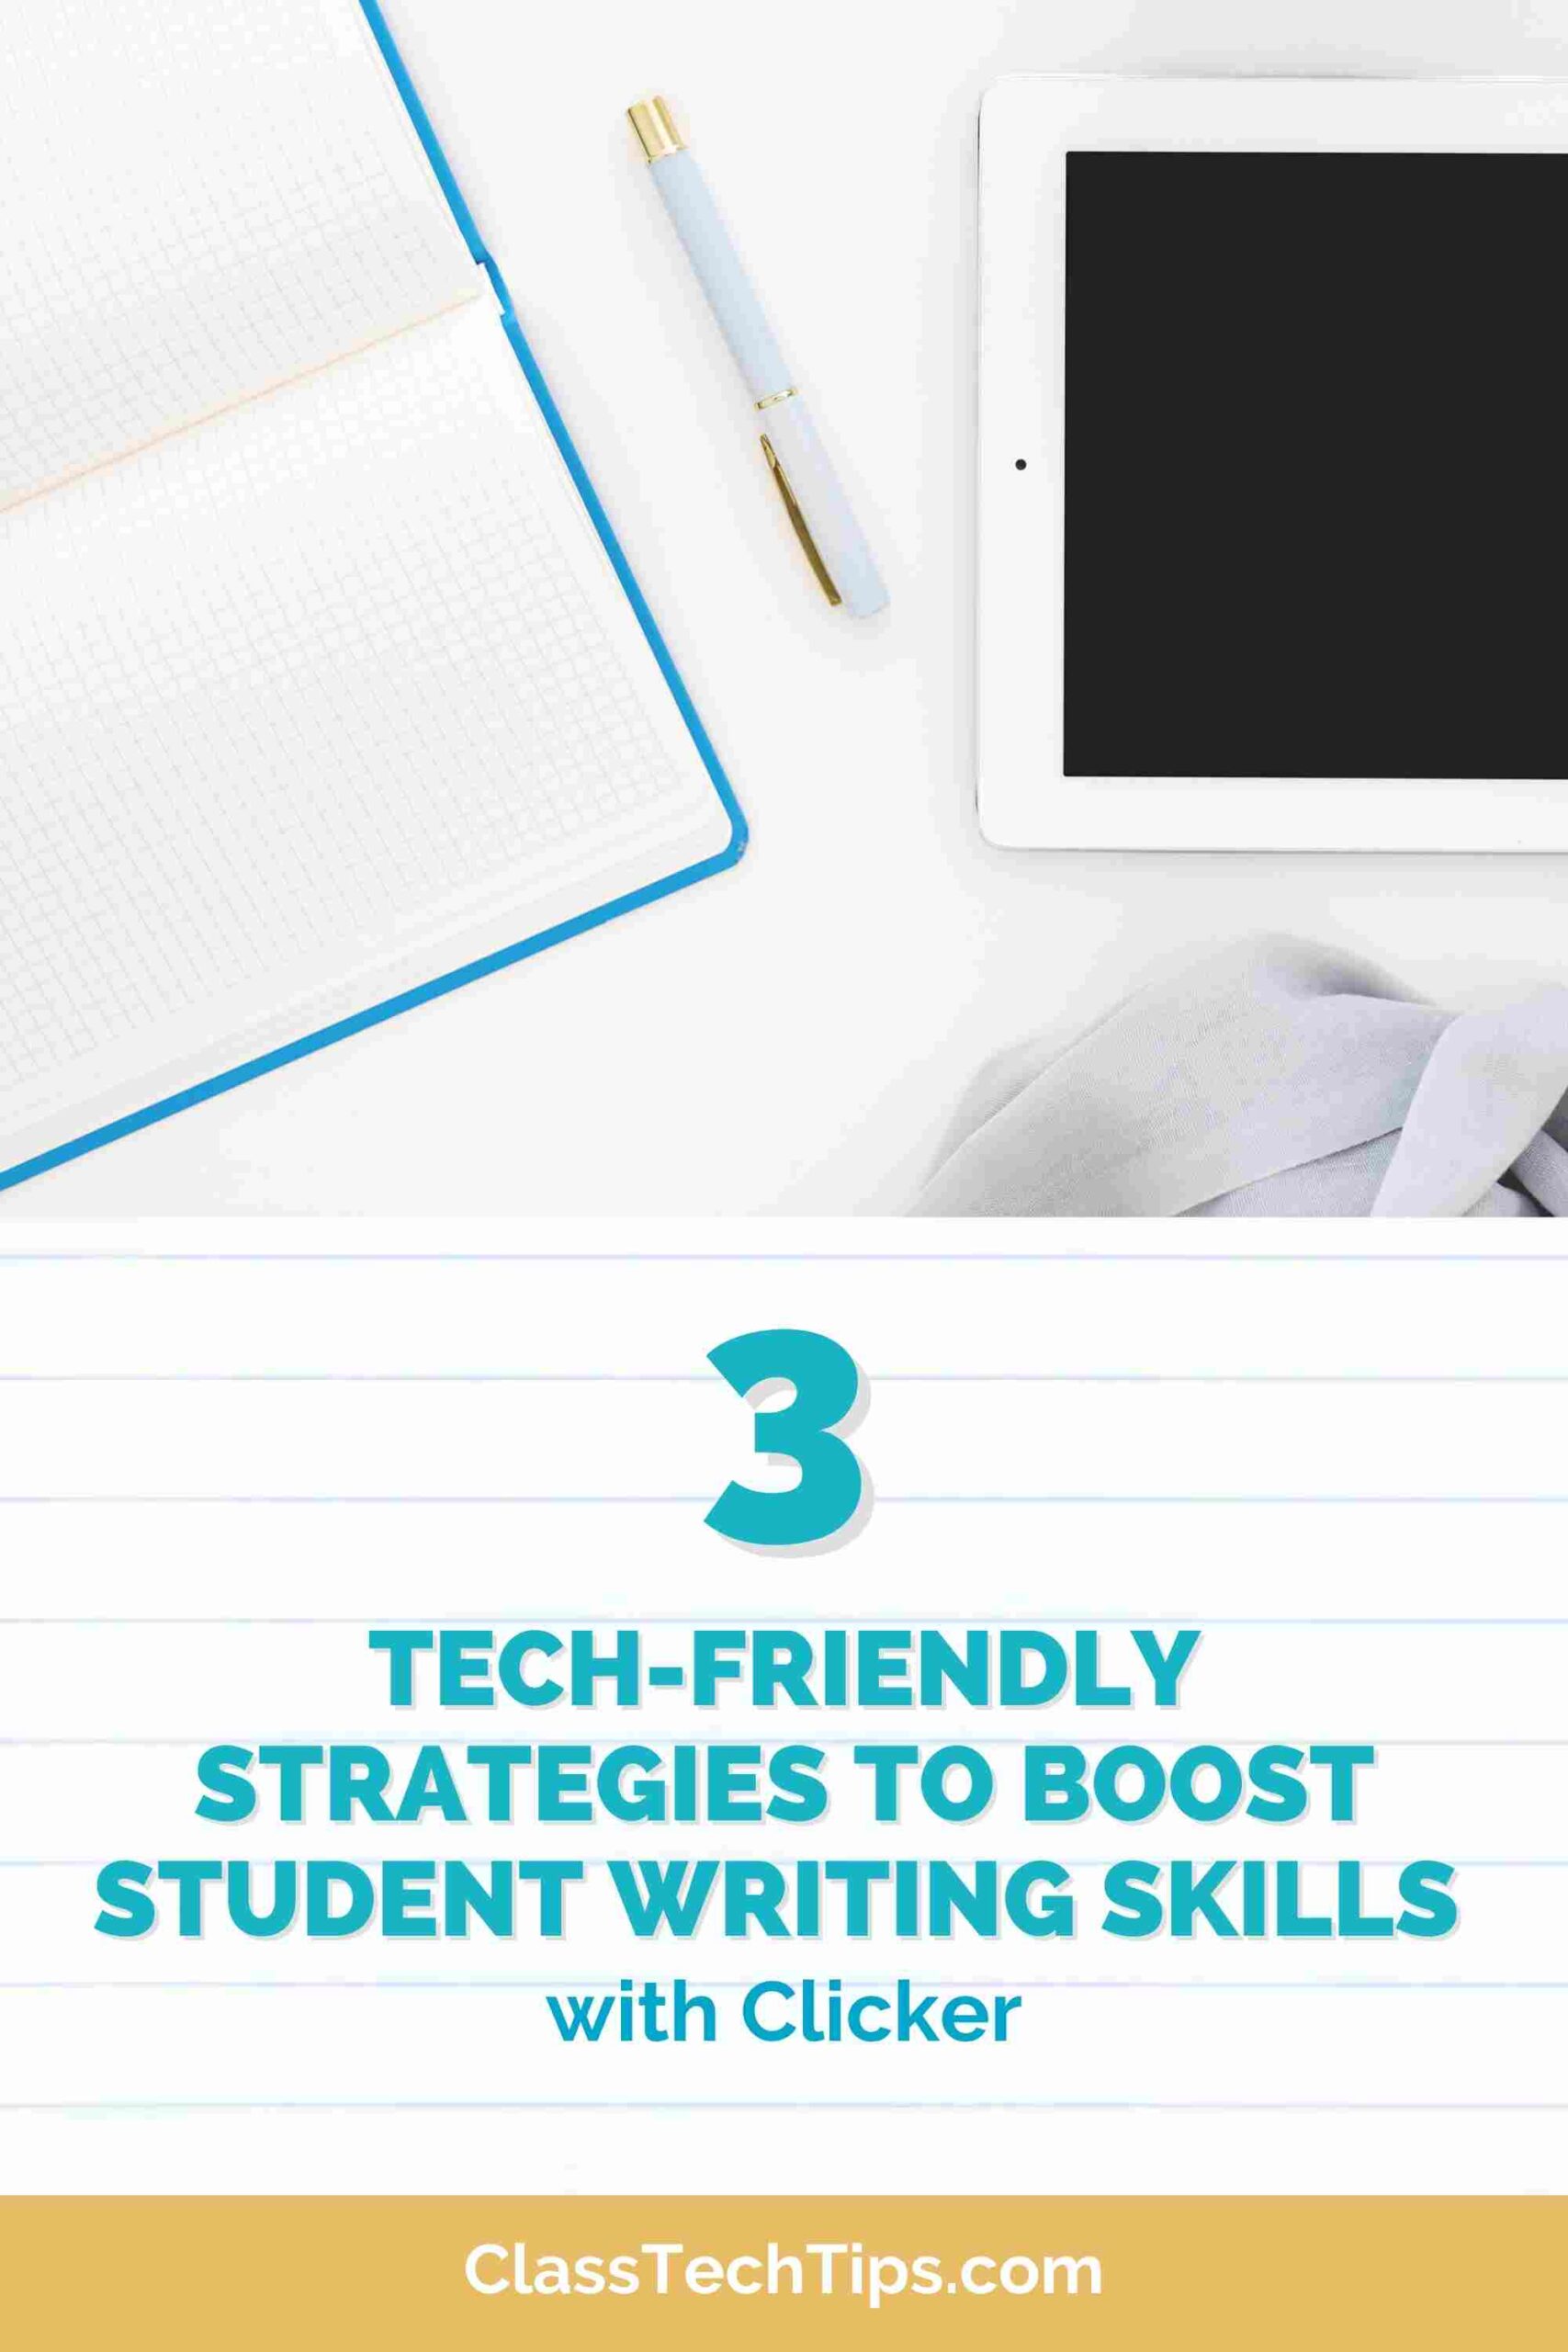 Student Writing Skill Building